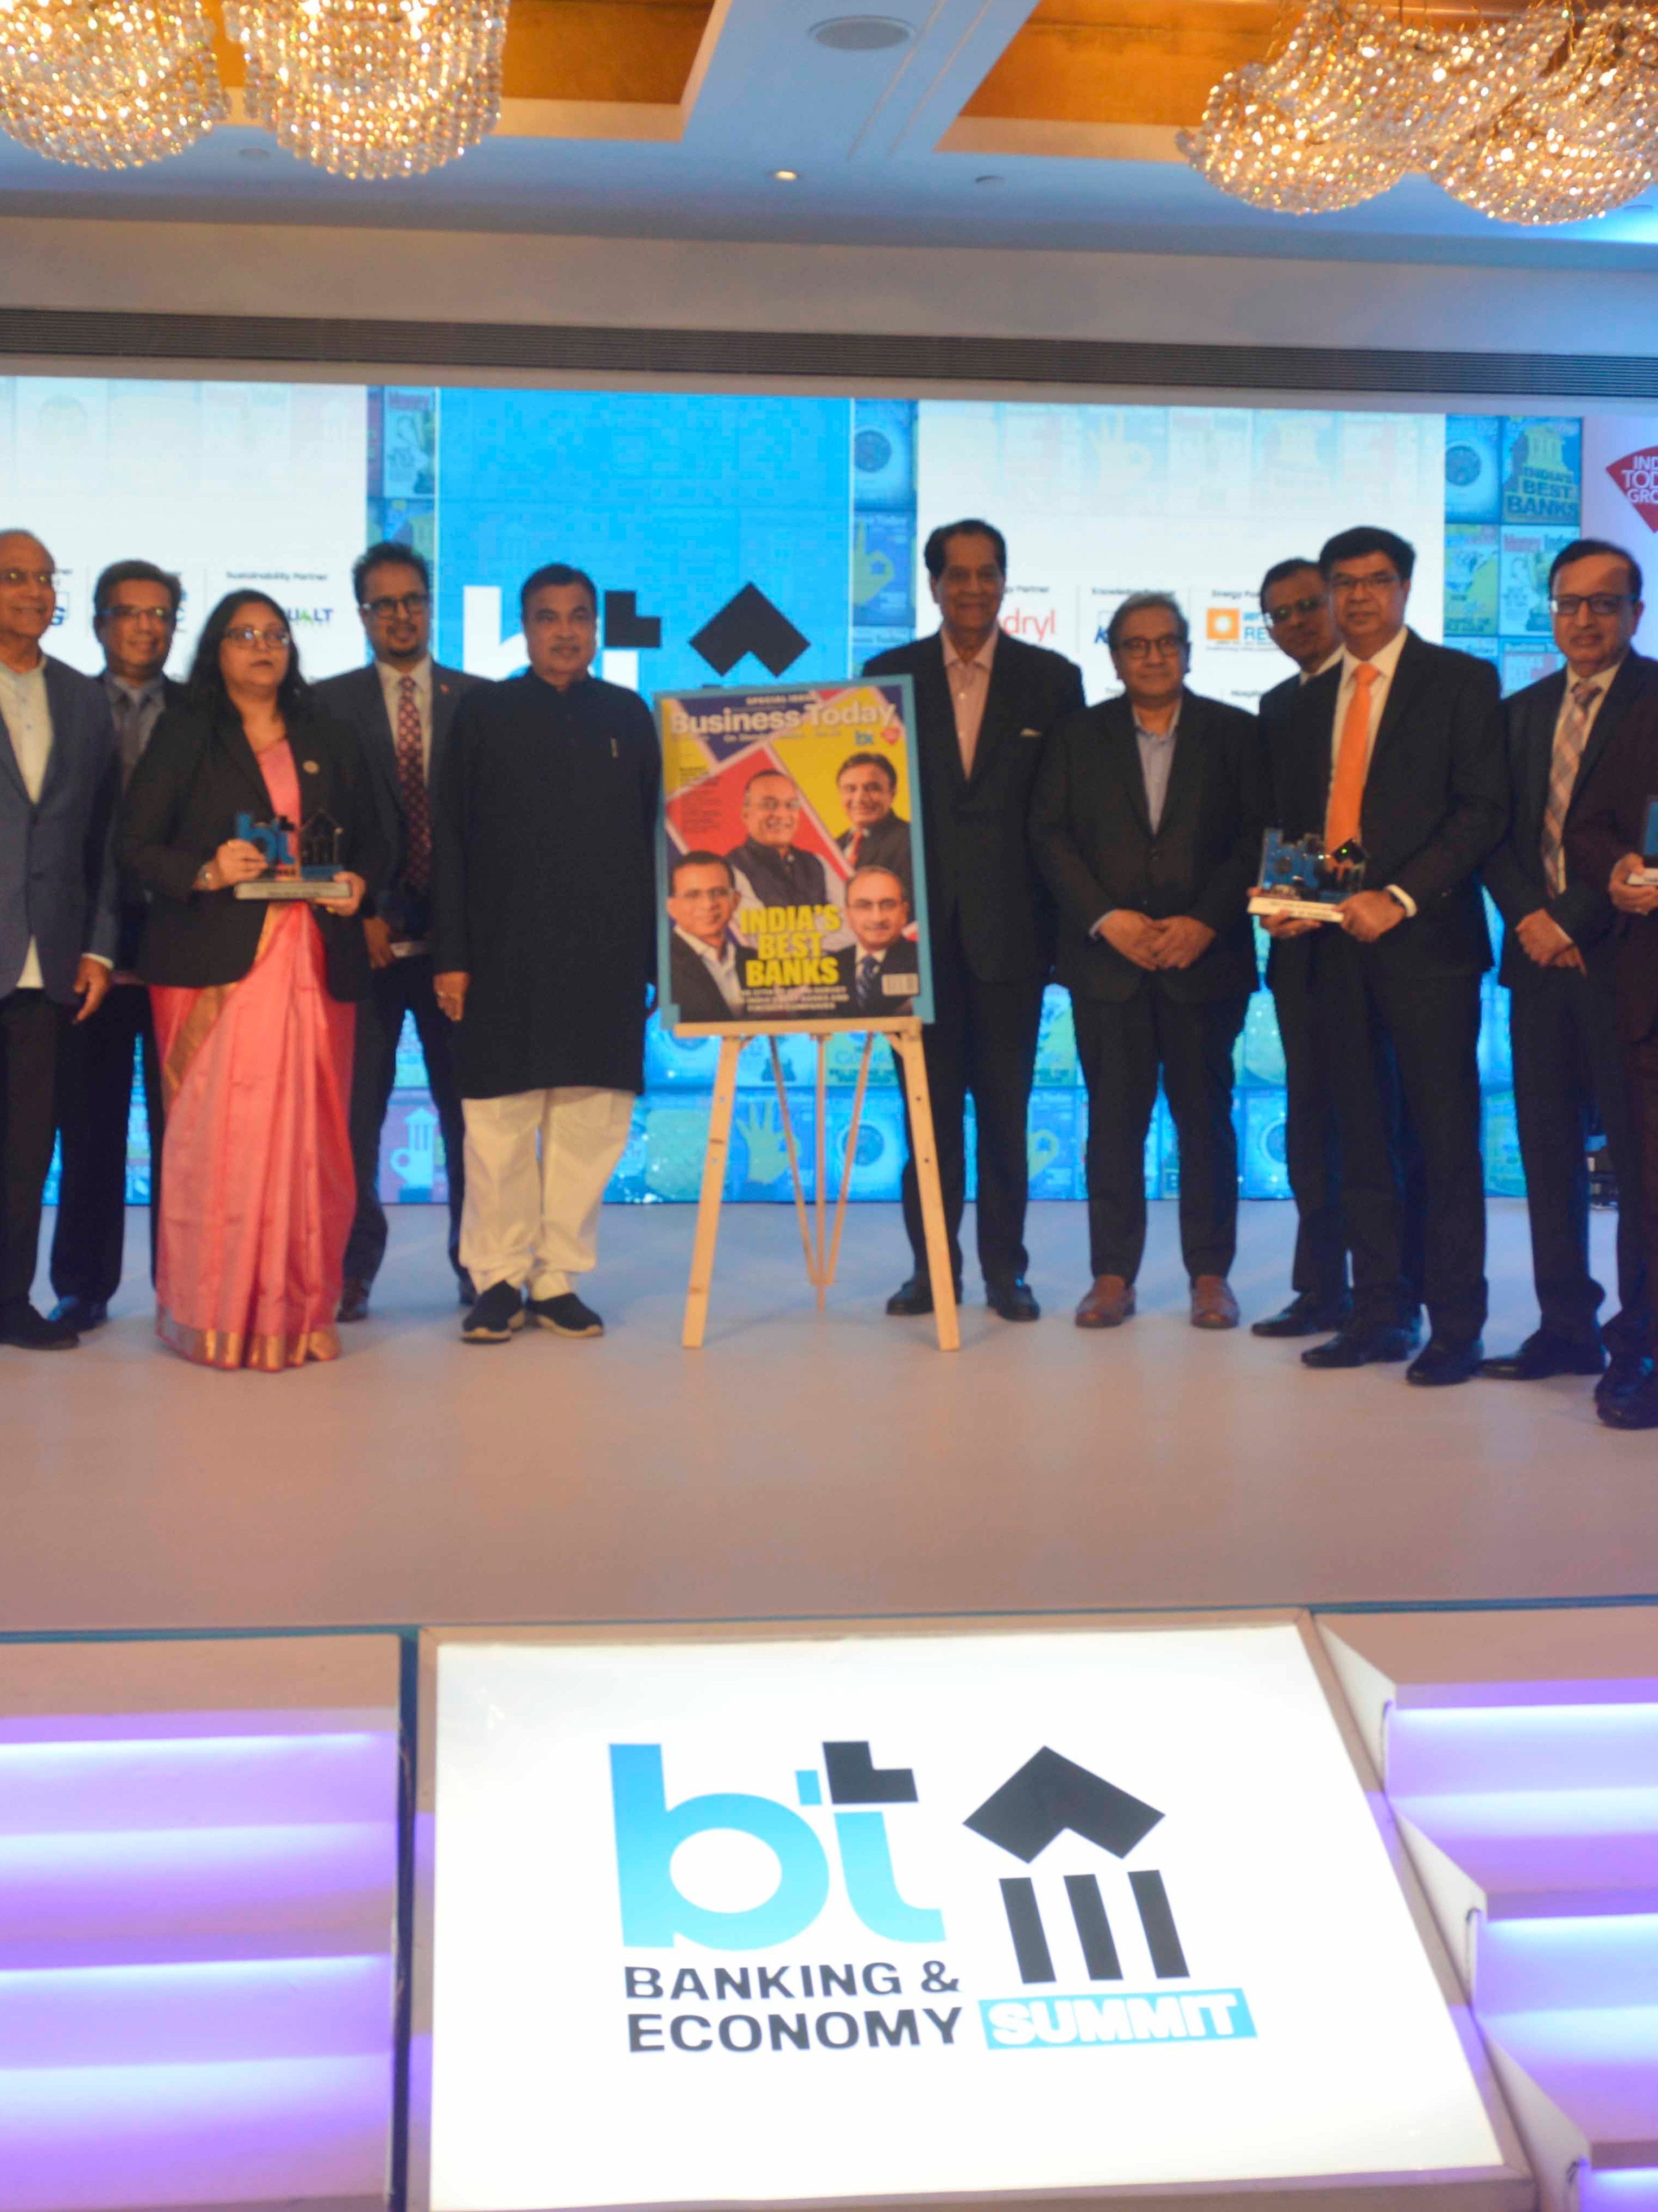 Business Today Banking Summit: Who Said What, BT-KPMG Best Banks Awards Winners